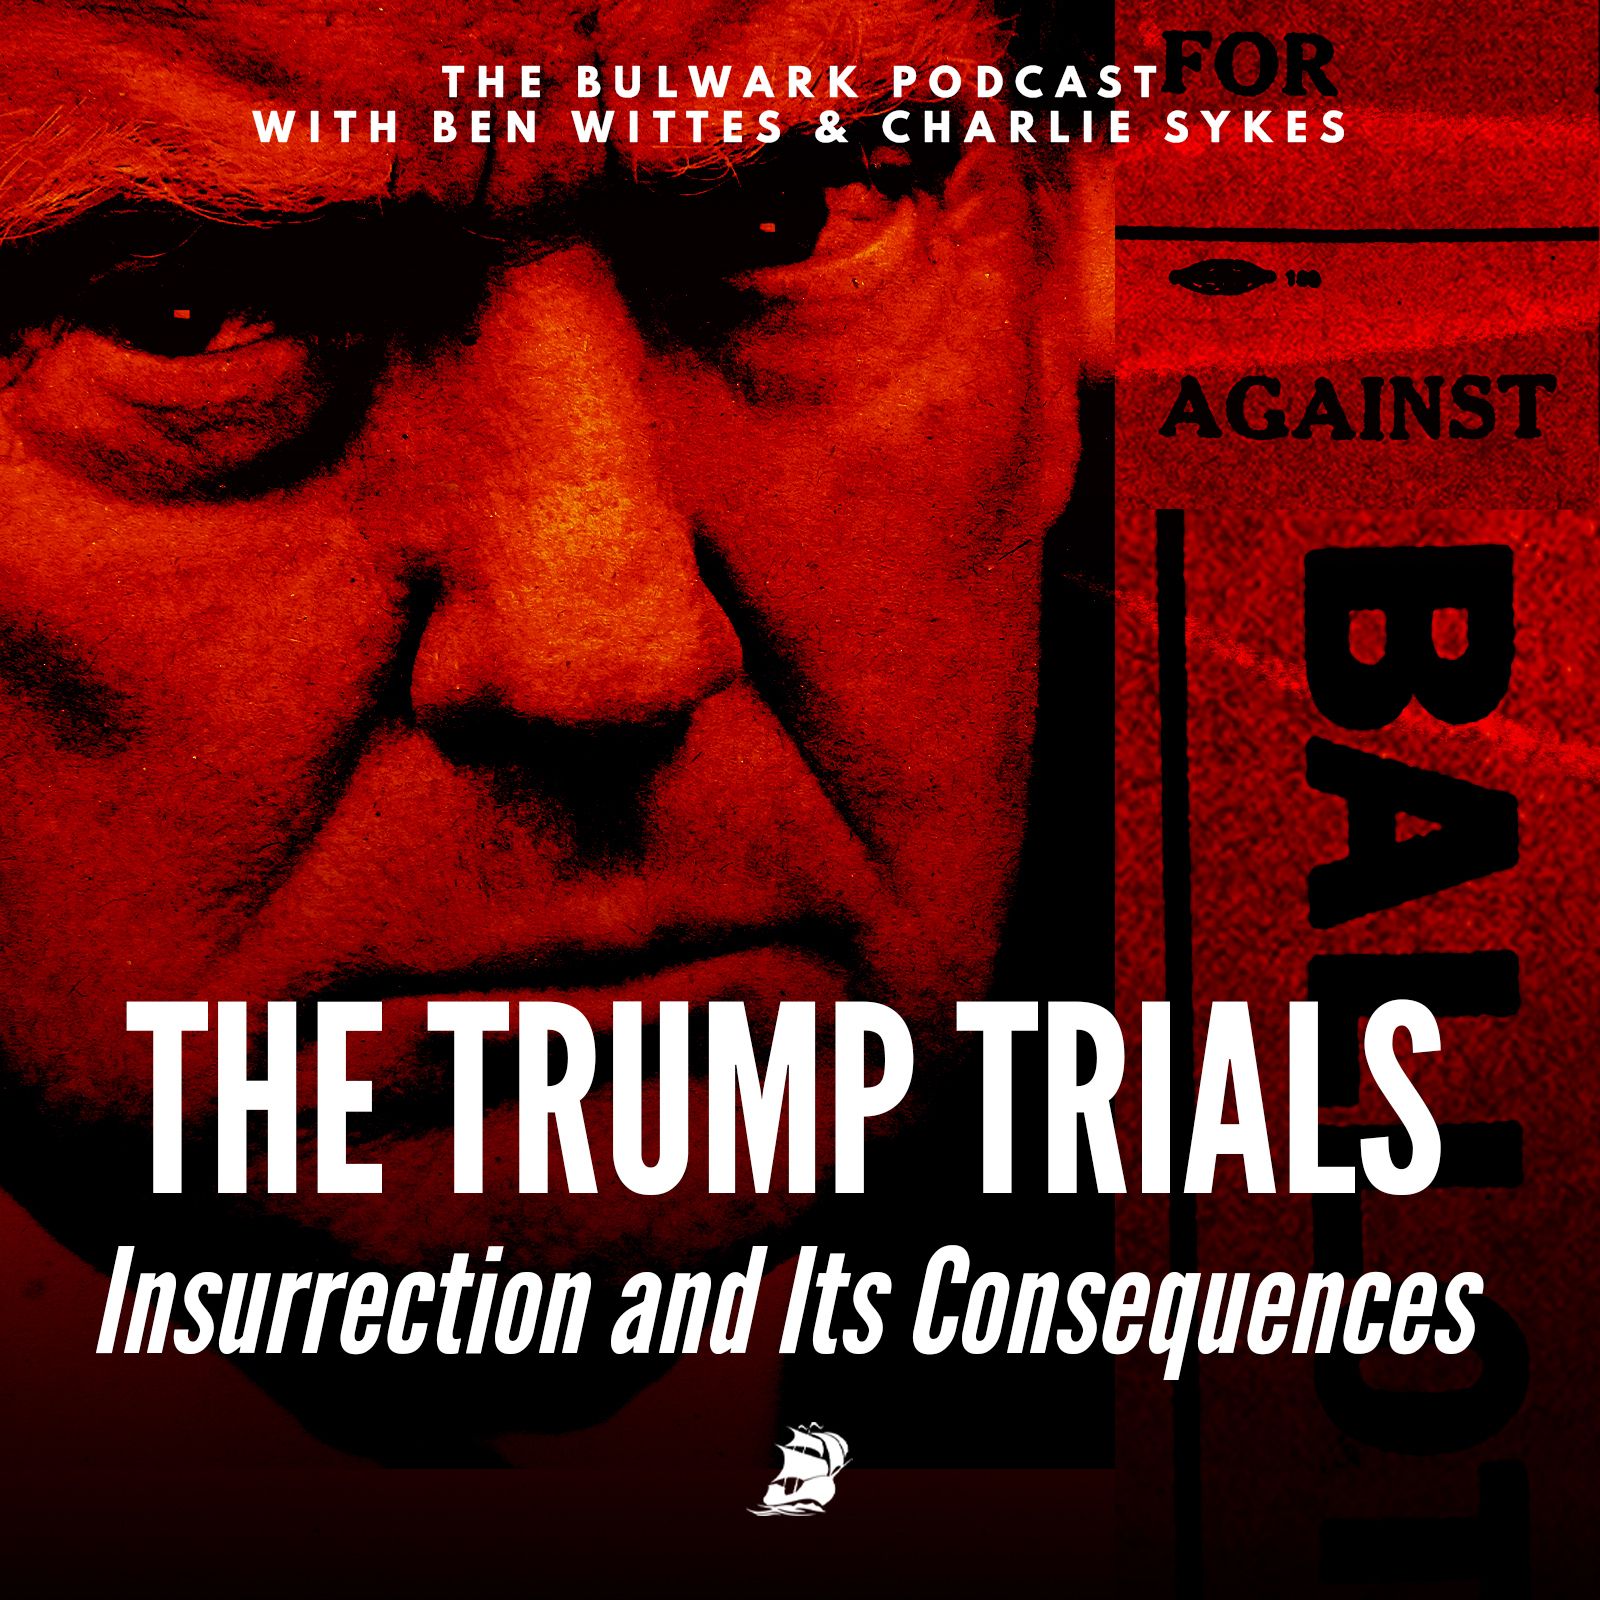 Insurrection and Its Consequences by The Bulwark Podcast